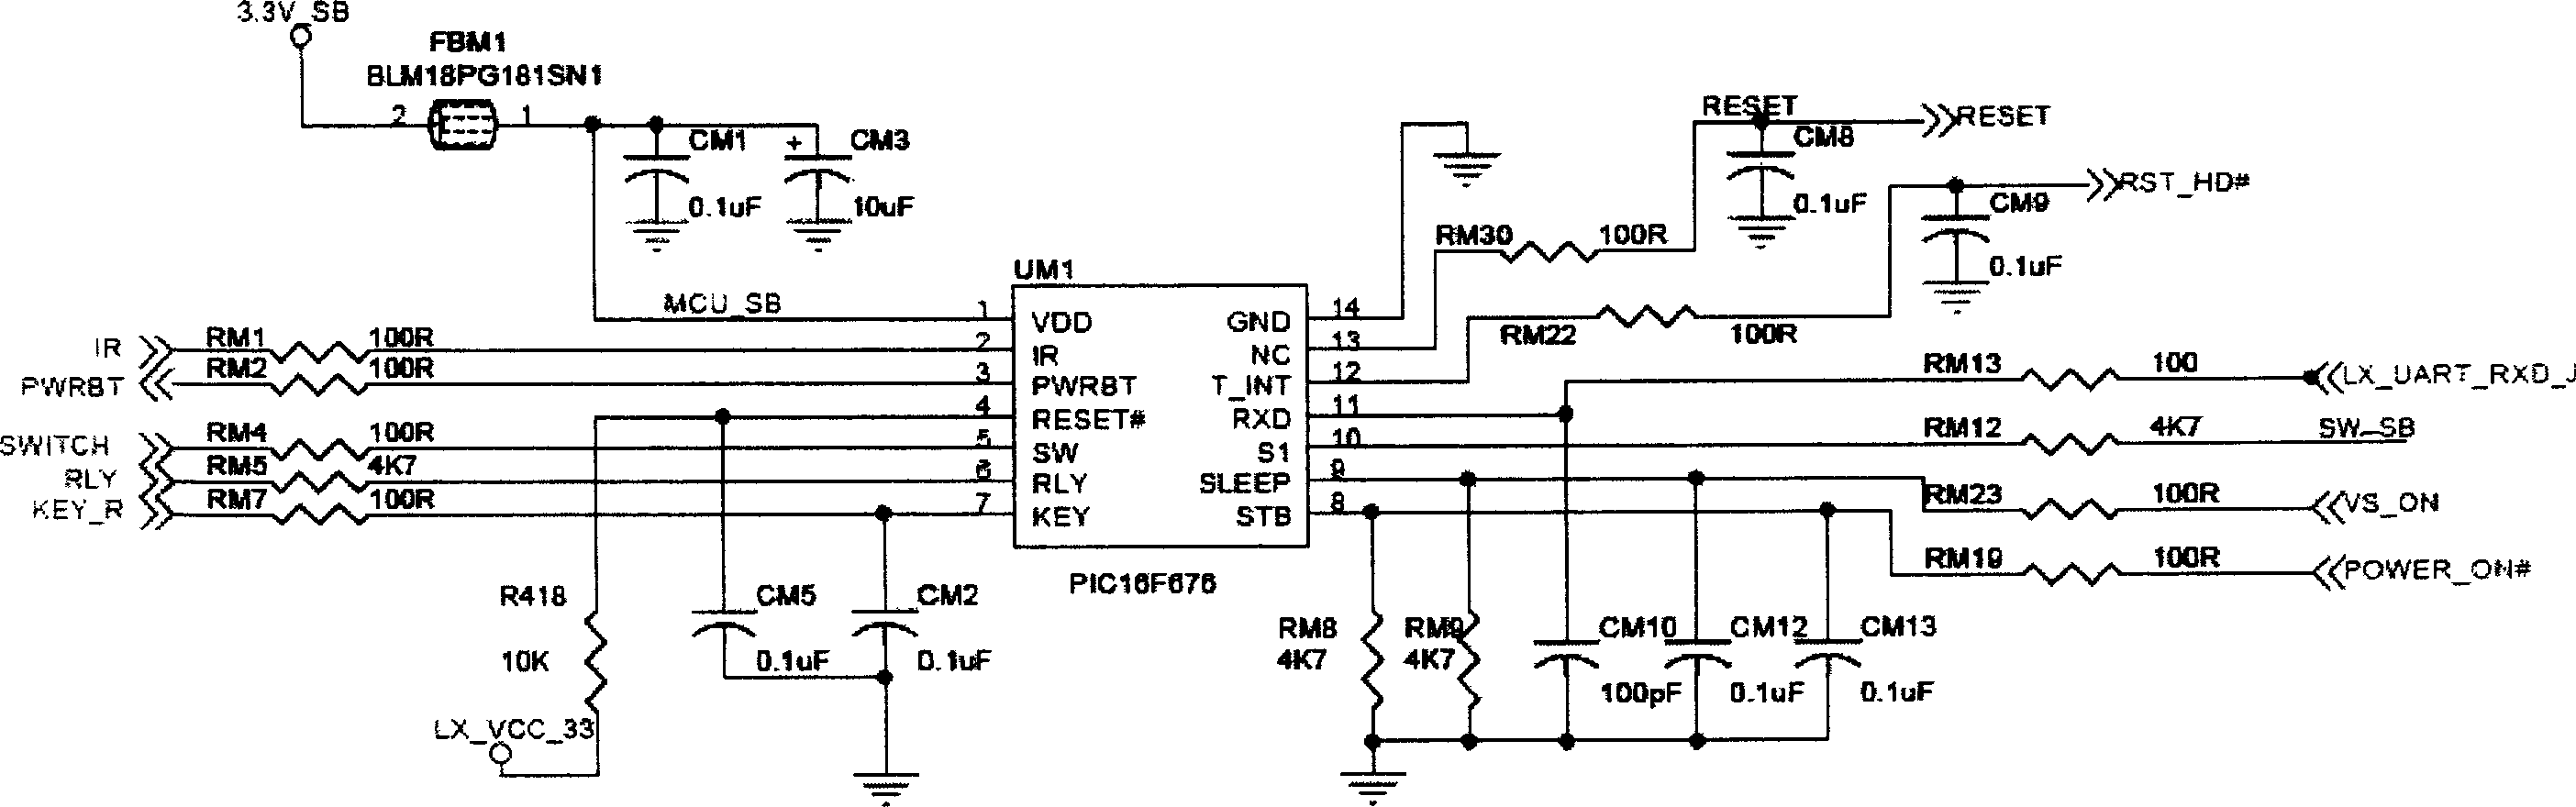 Quick starting TV set capable of implementing low power dissipation in stand by